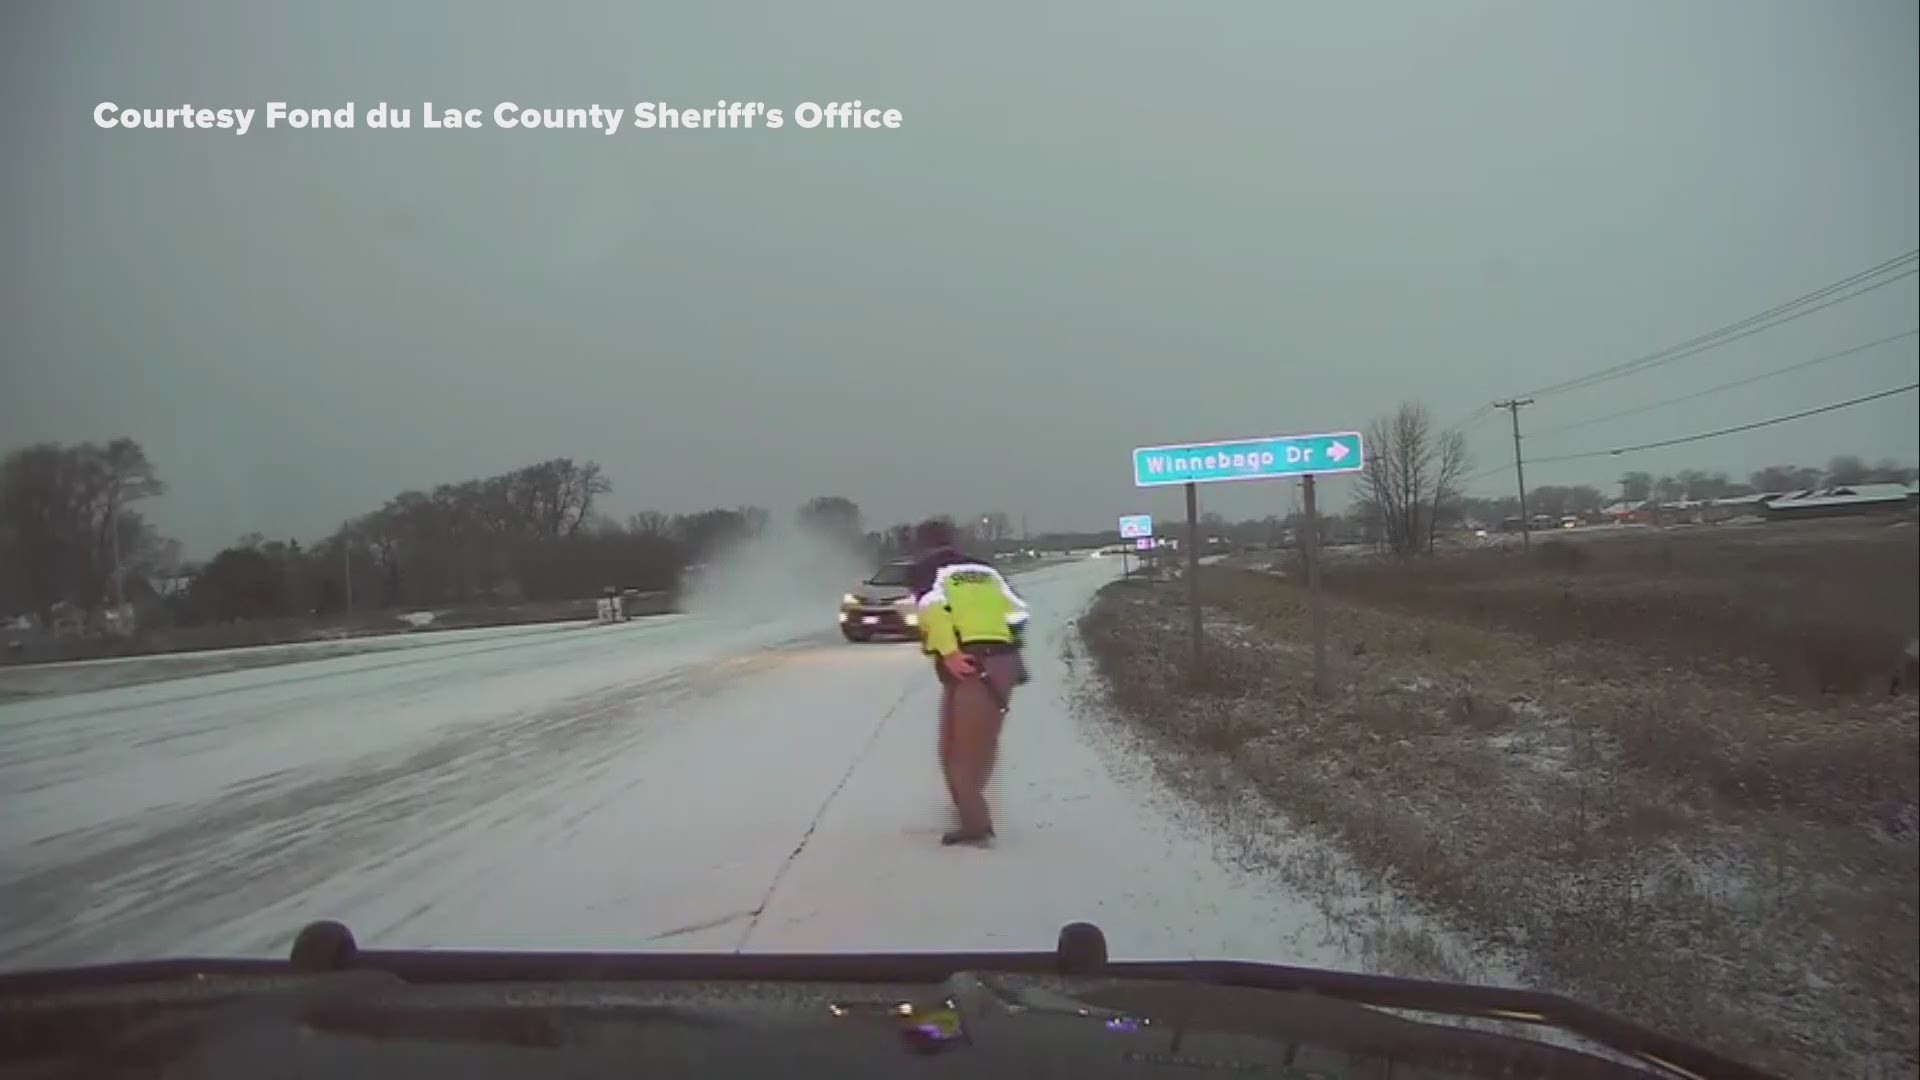 The Fond du Lac County Sheriff's Office released this jarring video on Facebook, reminding drivers to slow down on winter roads.